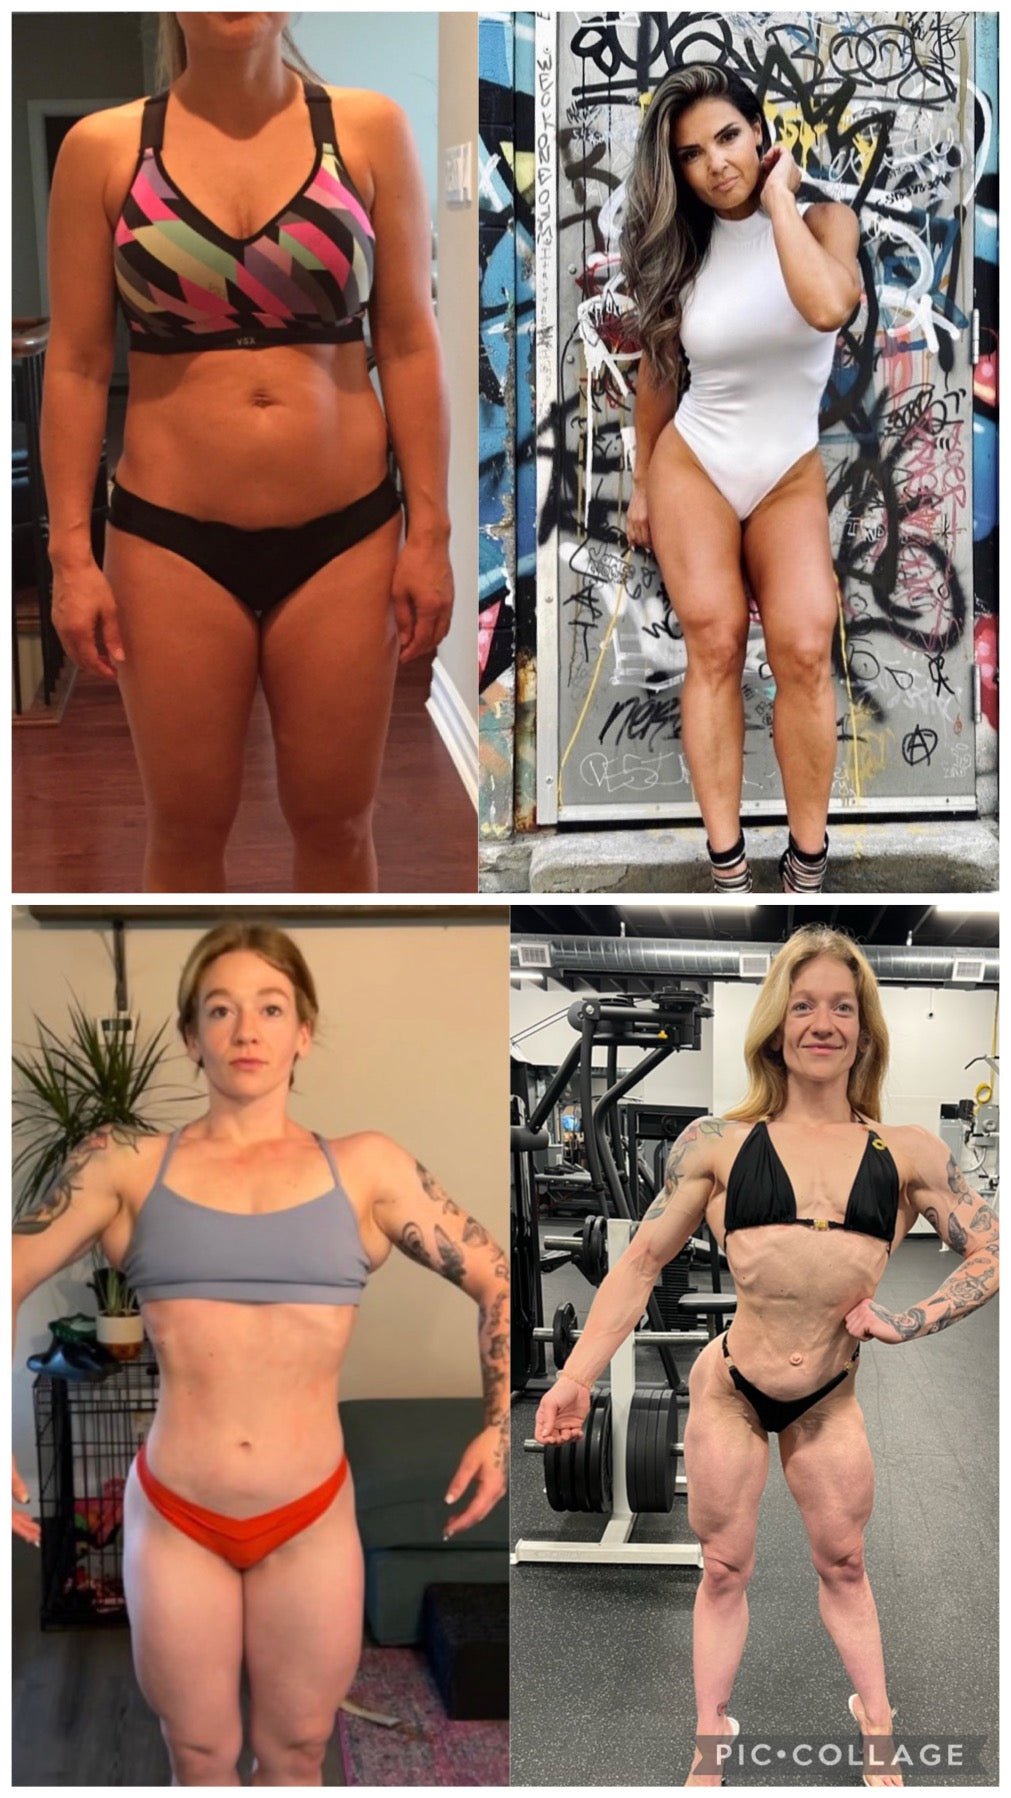 Compilation of two women who have all gone through health and body improvements at the DeMelo Fitness gym. Both women are trainers at the gym